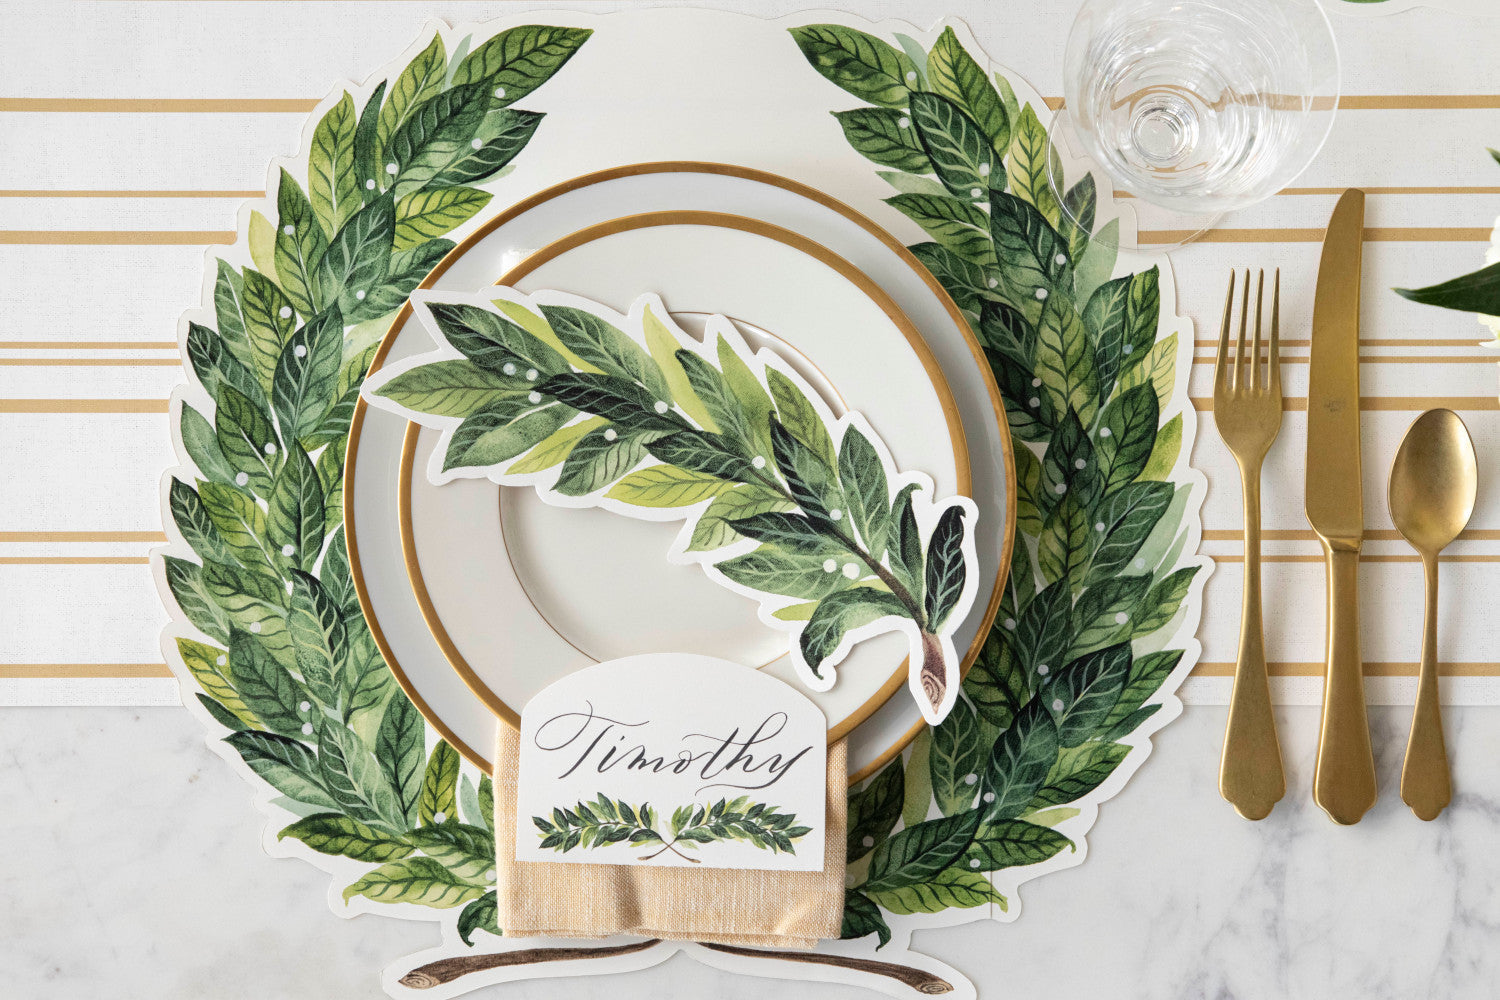 An elegant place setting with gold accents featuring a Laurel Table Accent resting on the plate.